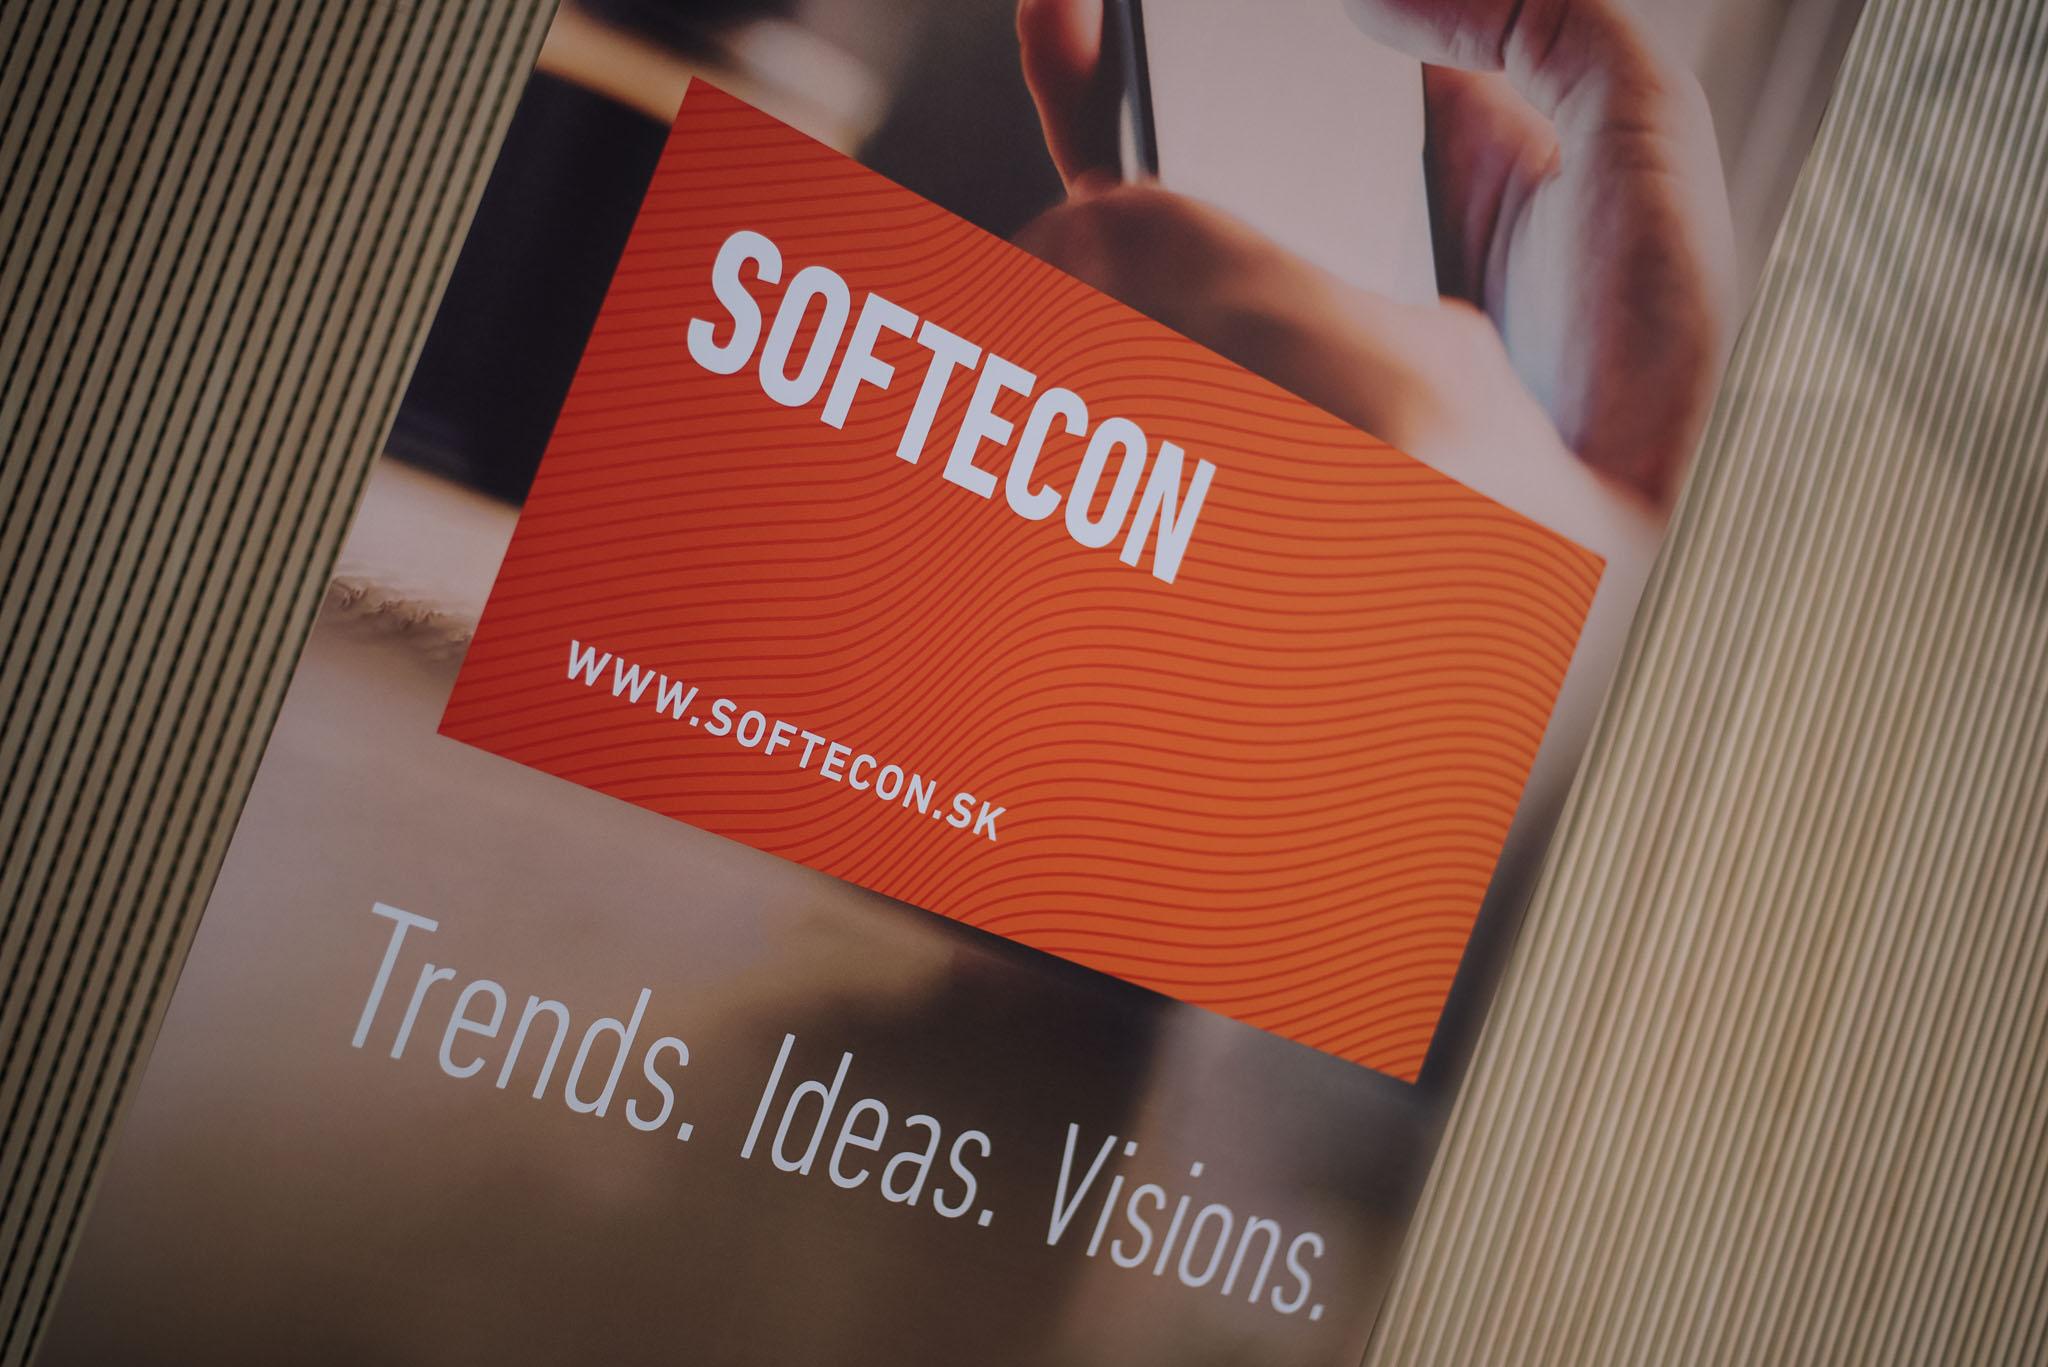 Softecon 2018 | Conference photographer